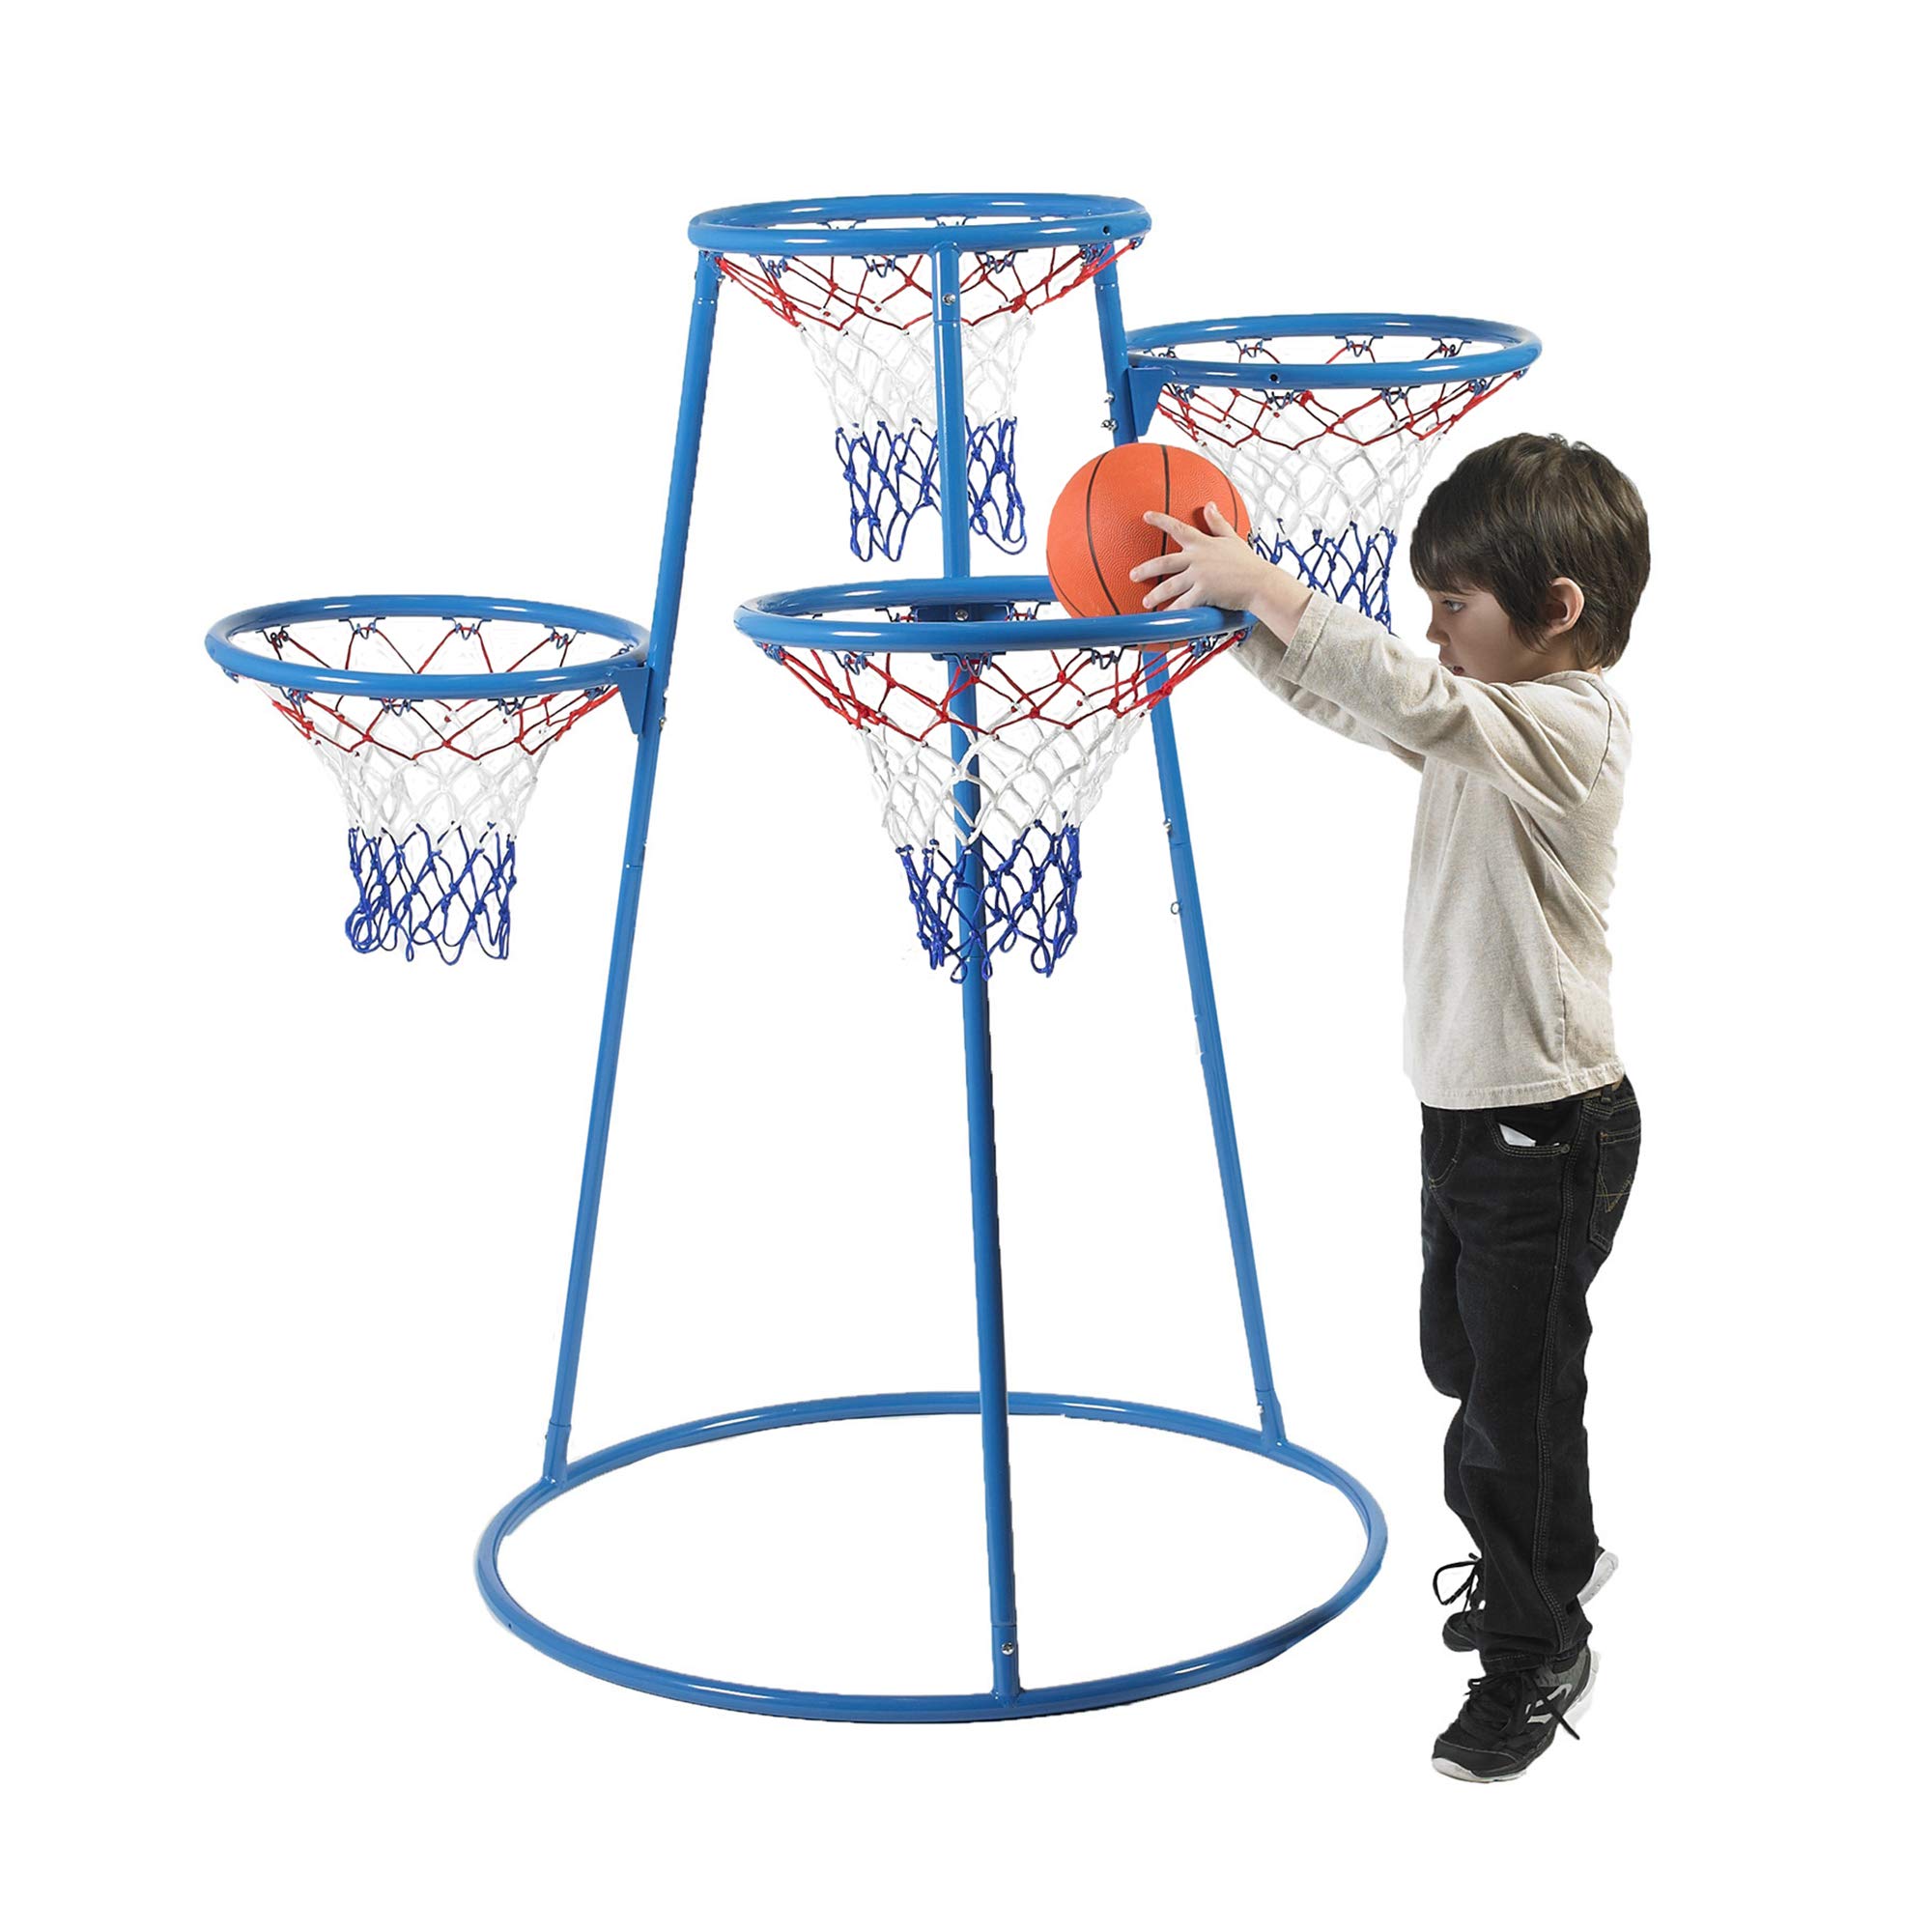 Children’s Factory, AFB7950, Angeles 4-Rings Basketball Hoops with Storage Bag, Blue, Toddler and Kids Indoor – Outdoor Preschool & Daycare Mini Hoops